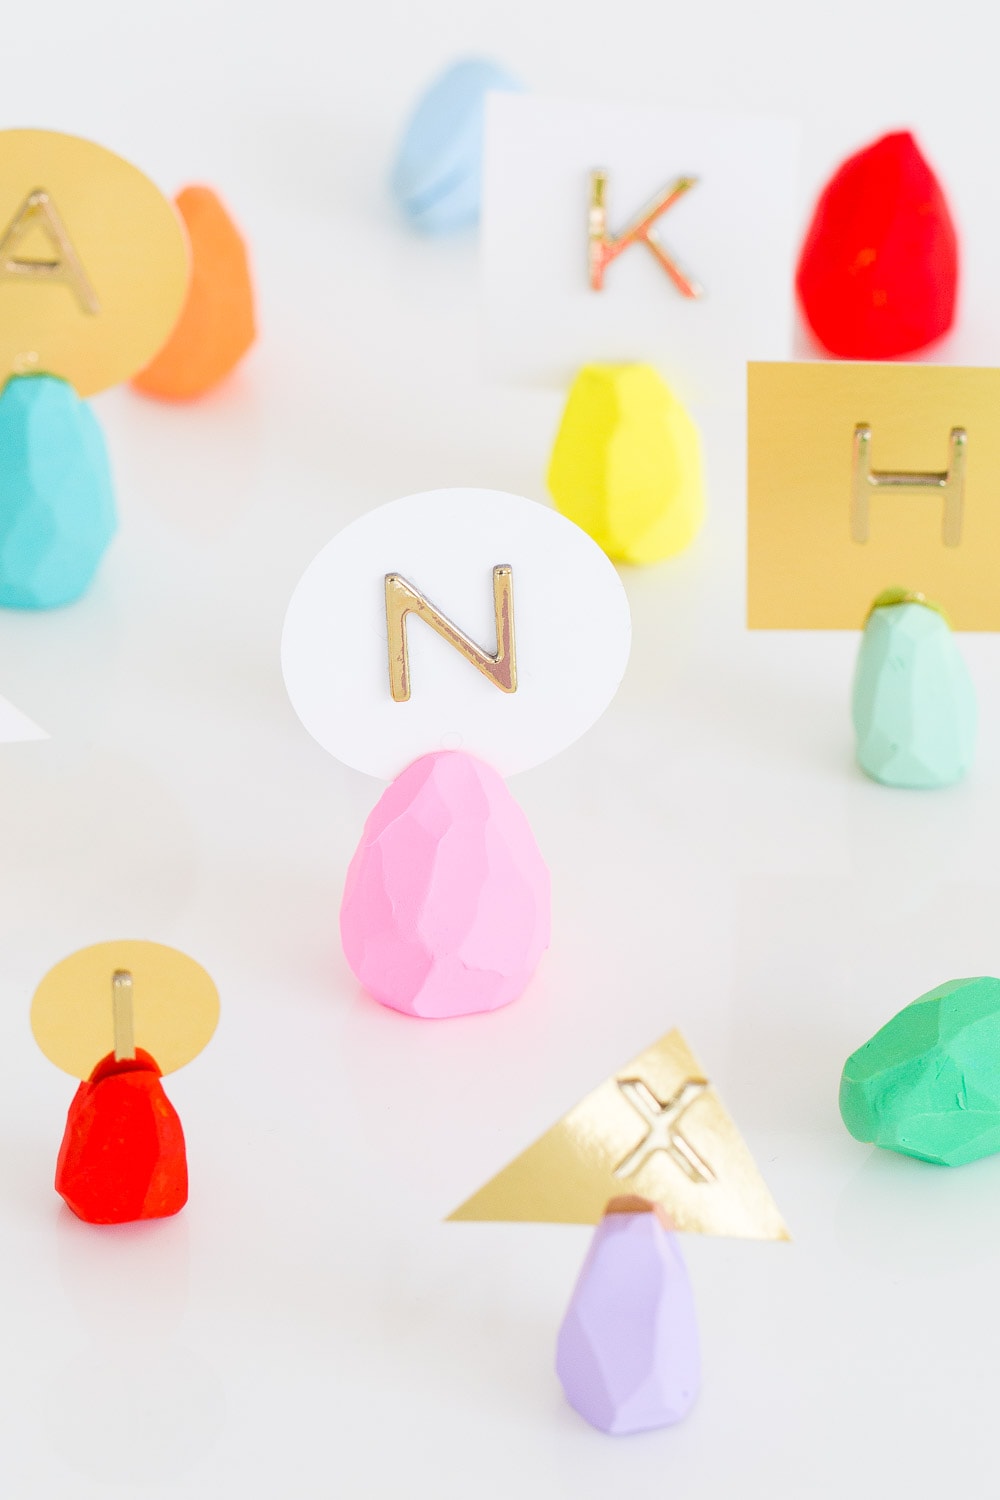 Spicing up the table with these DIY faceted Easter egg place card holders on Sugar and Cloth